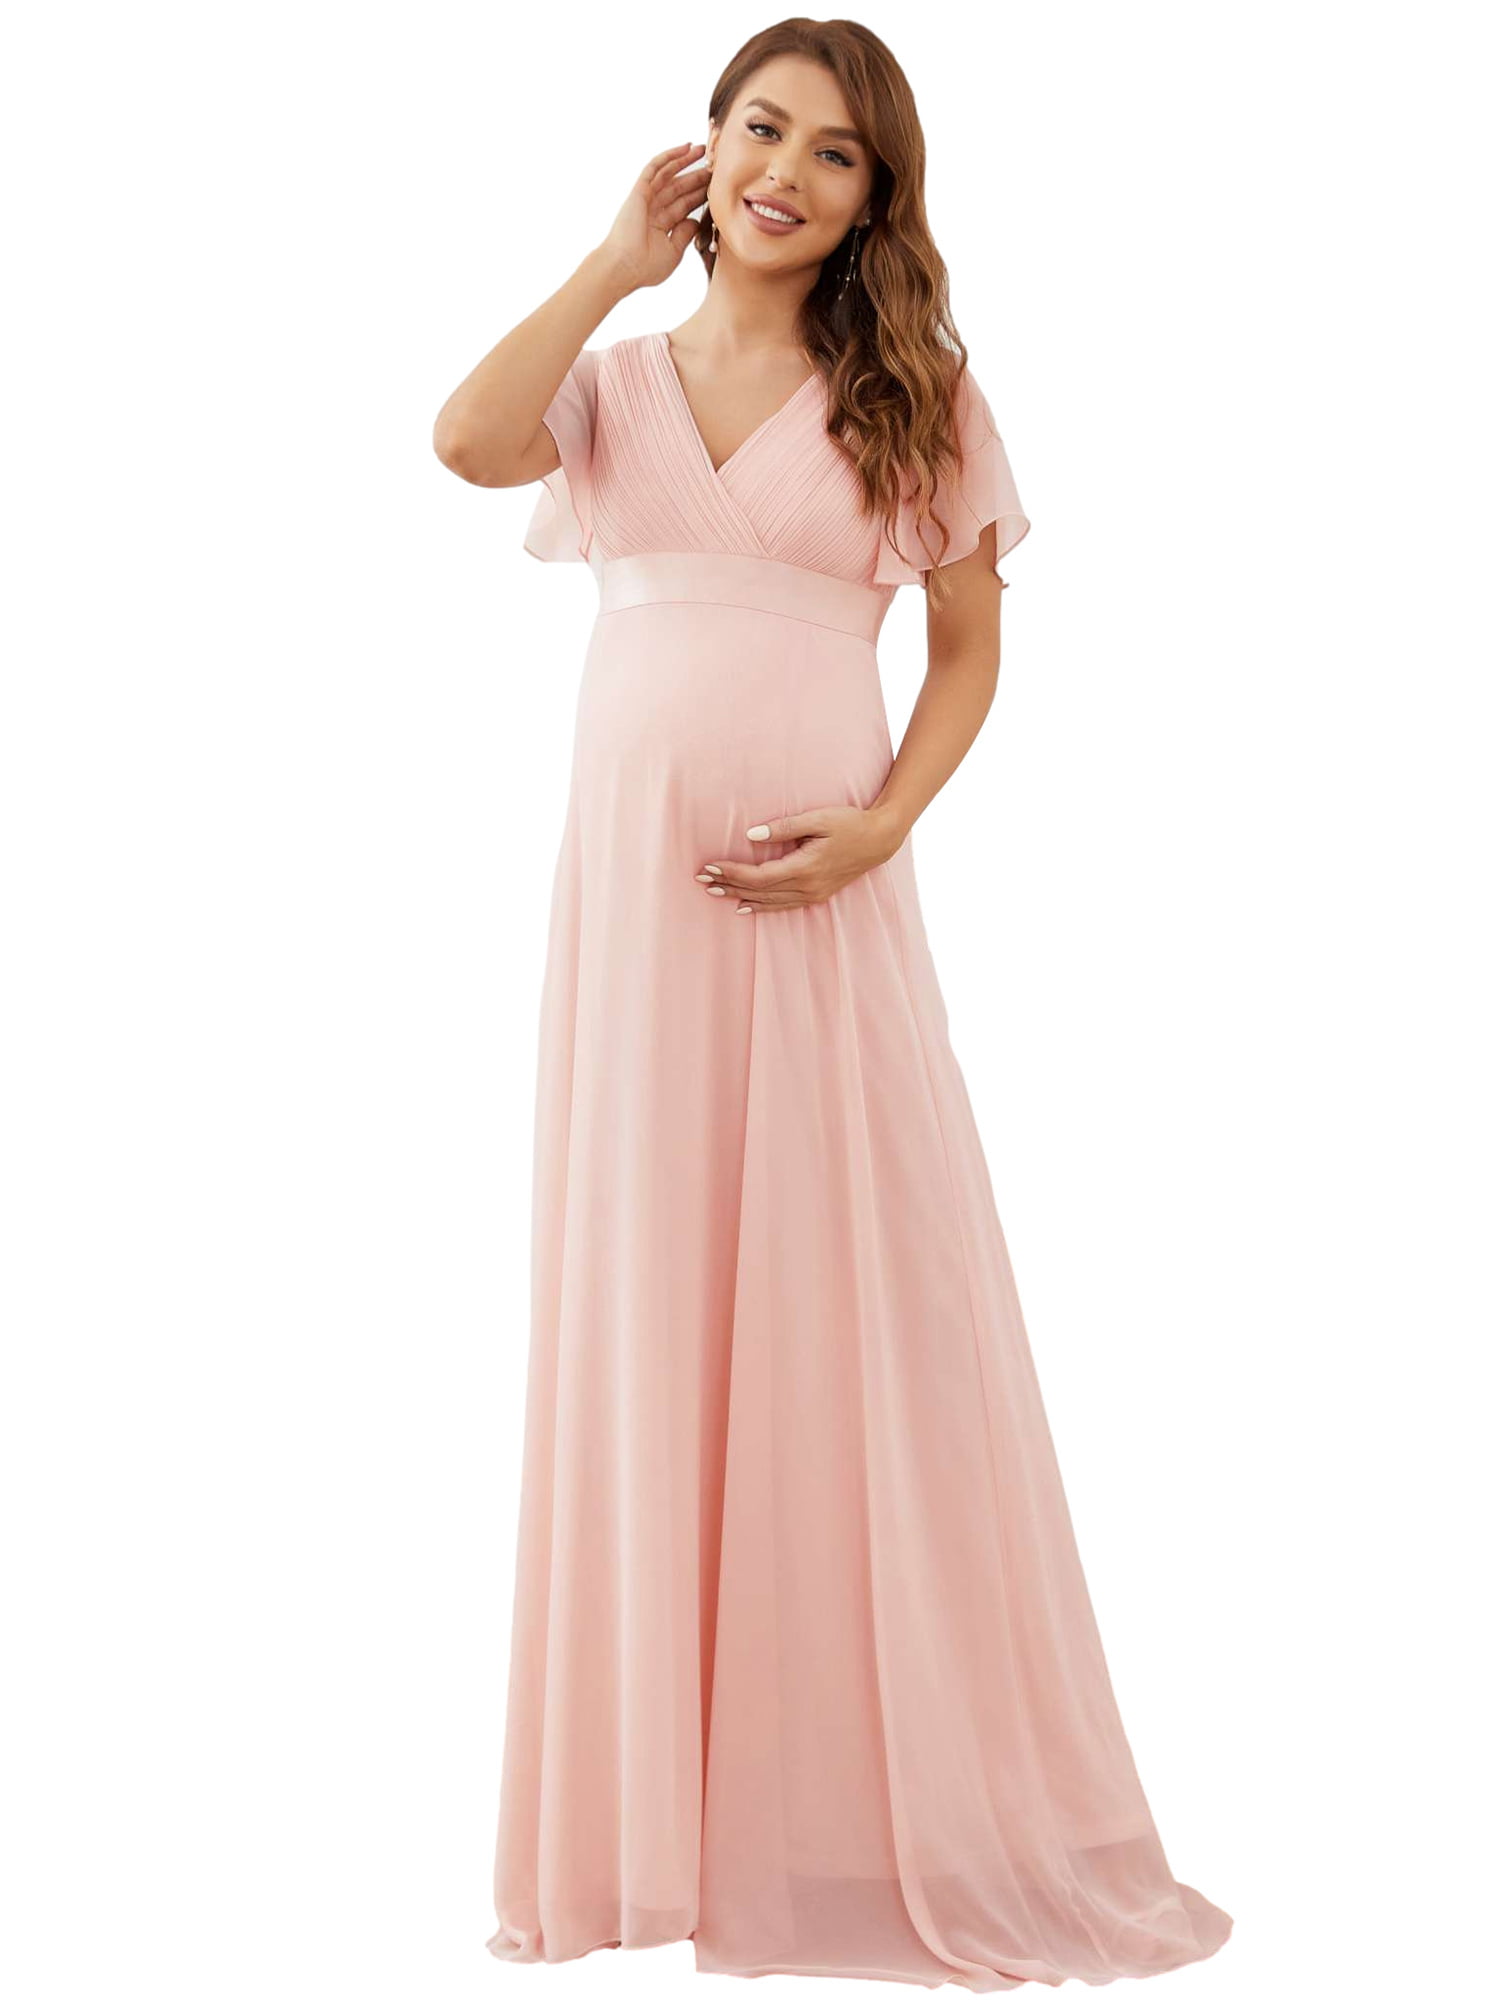 Ever-Pretty Women Chiffon V-Neck Maternity Party Dresses for Baby Shower with Sleeves 20795 